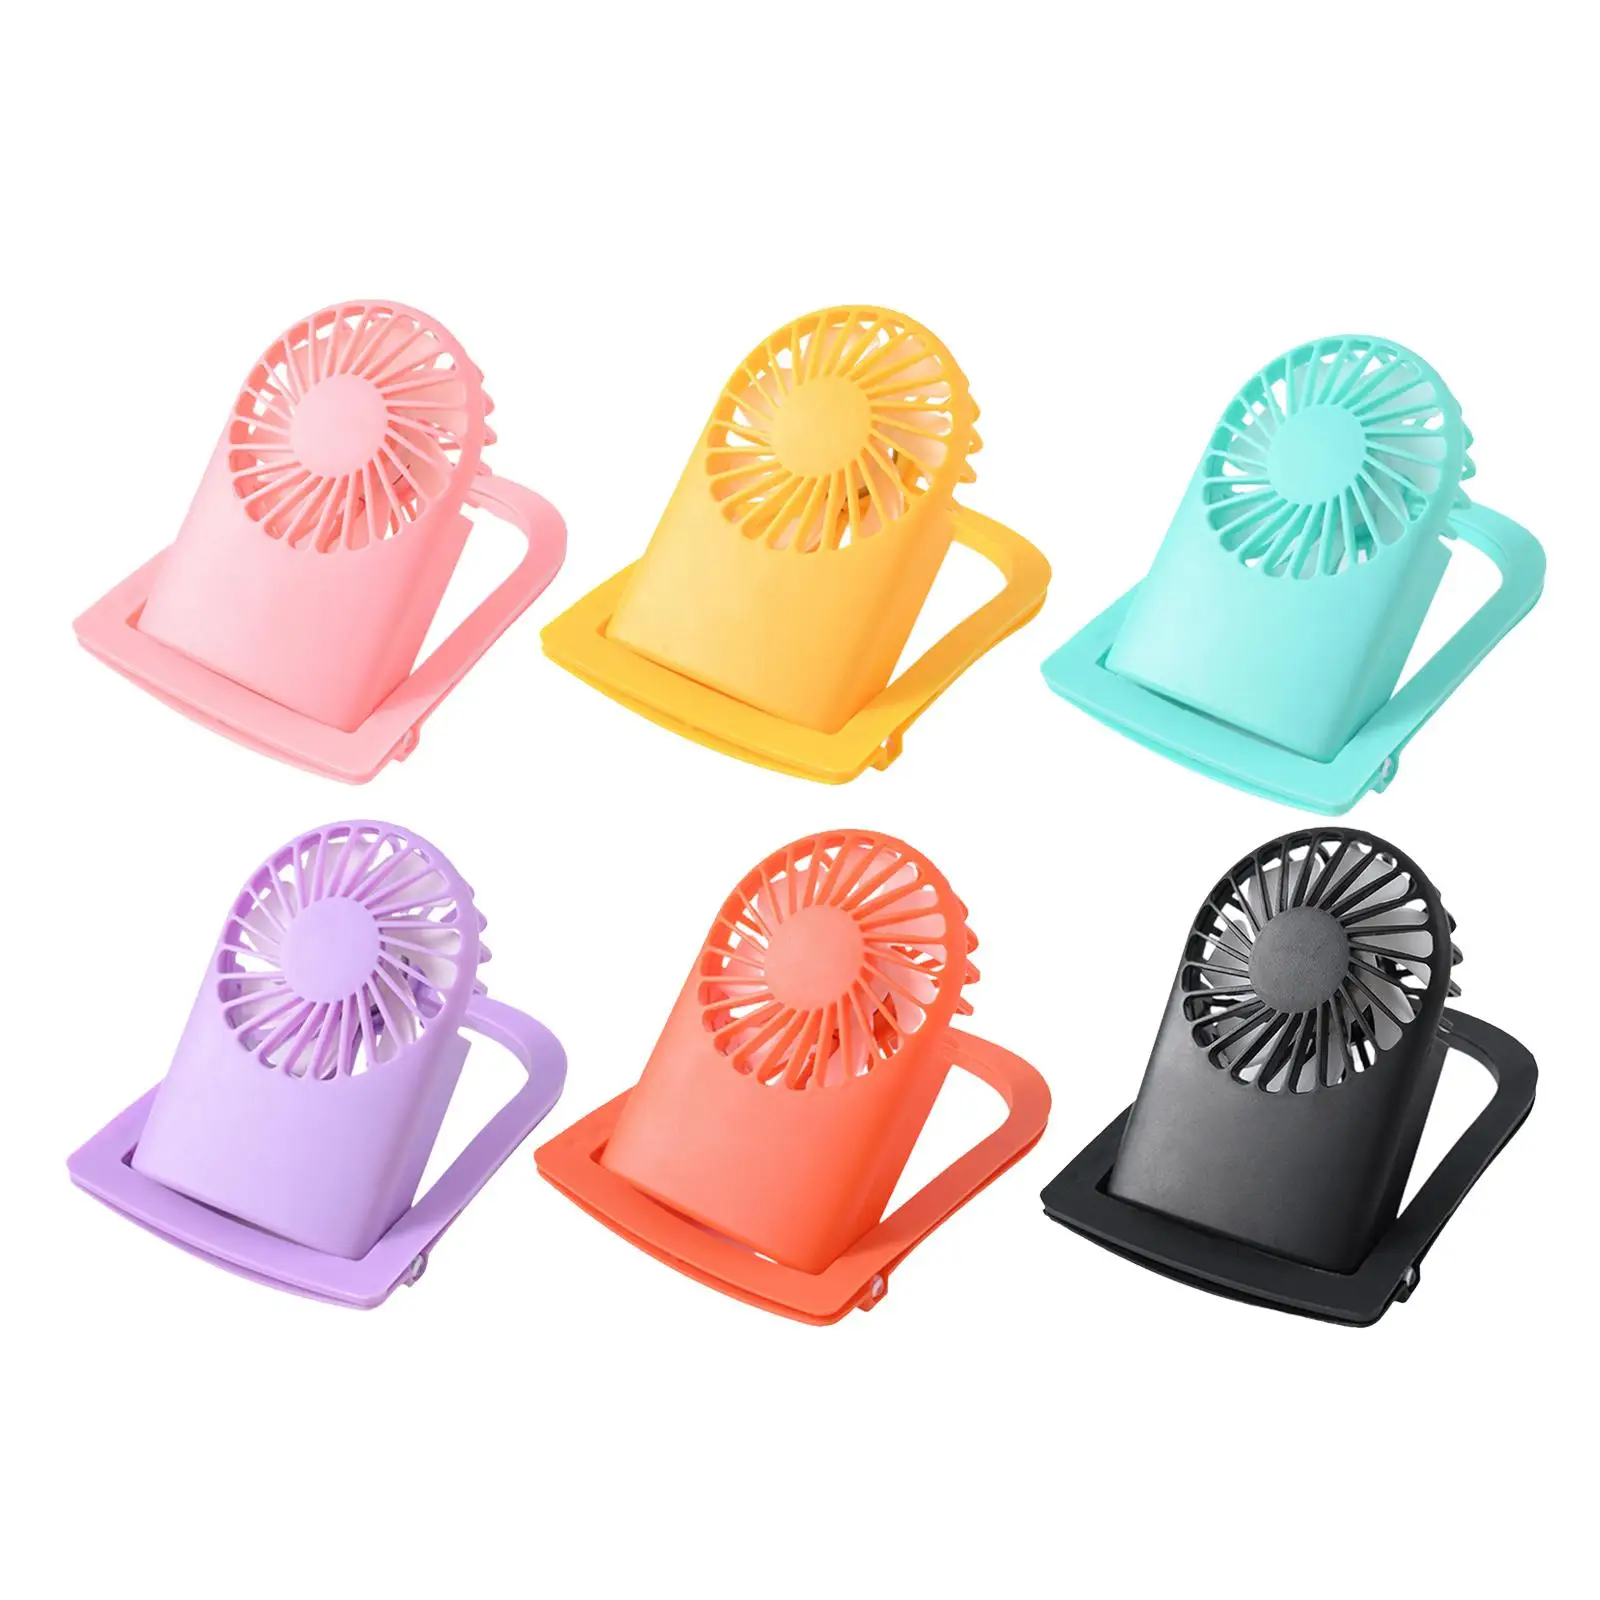 Summer Cooling Fan Adjustable 3 Speeds Portable USB Charging Air Cooling Fan for Summer Office Dormitory Indoor Outdoor Camping